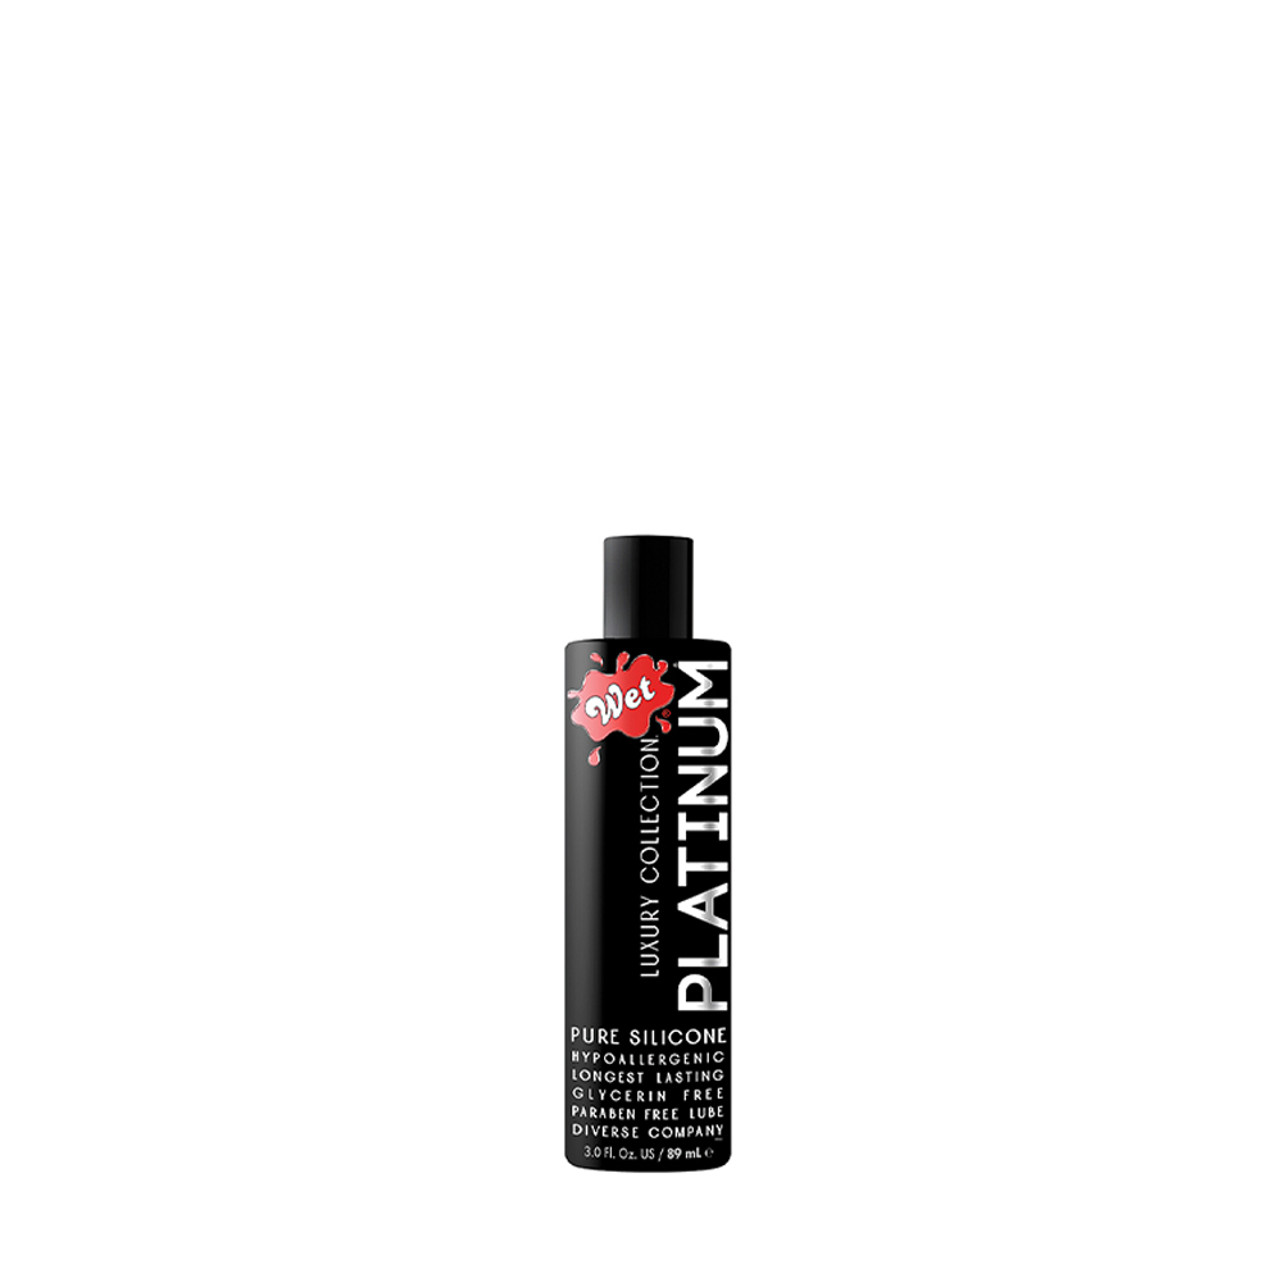 https://cdn11.bigcommerce.com/s-rph88/images/stencil/1280x1280/products/25256/243753/wet-luxury-collection-platinum-silicone-based-personal-lubricant-3-oz-1__11571.1650401929.jpg?c=2